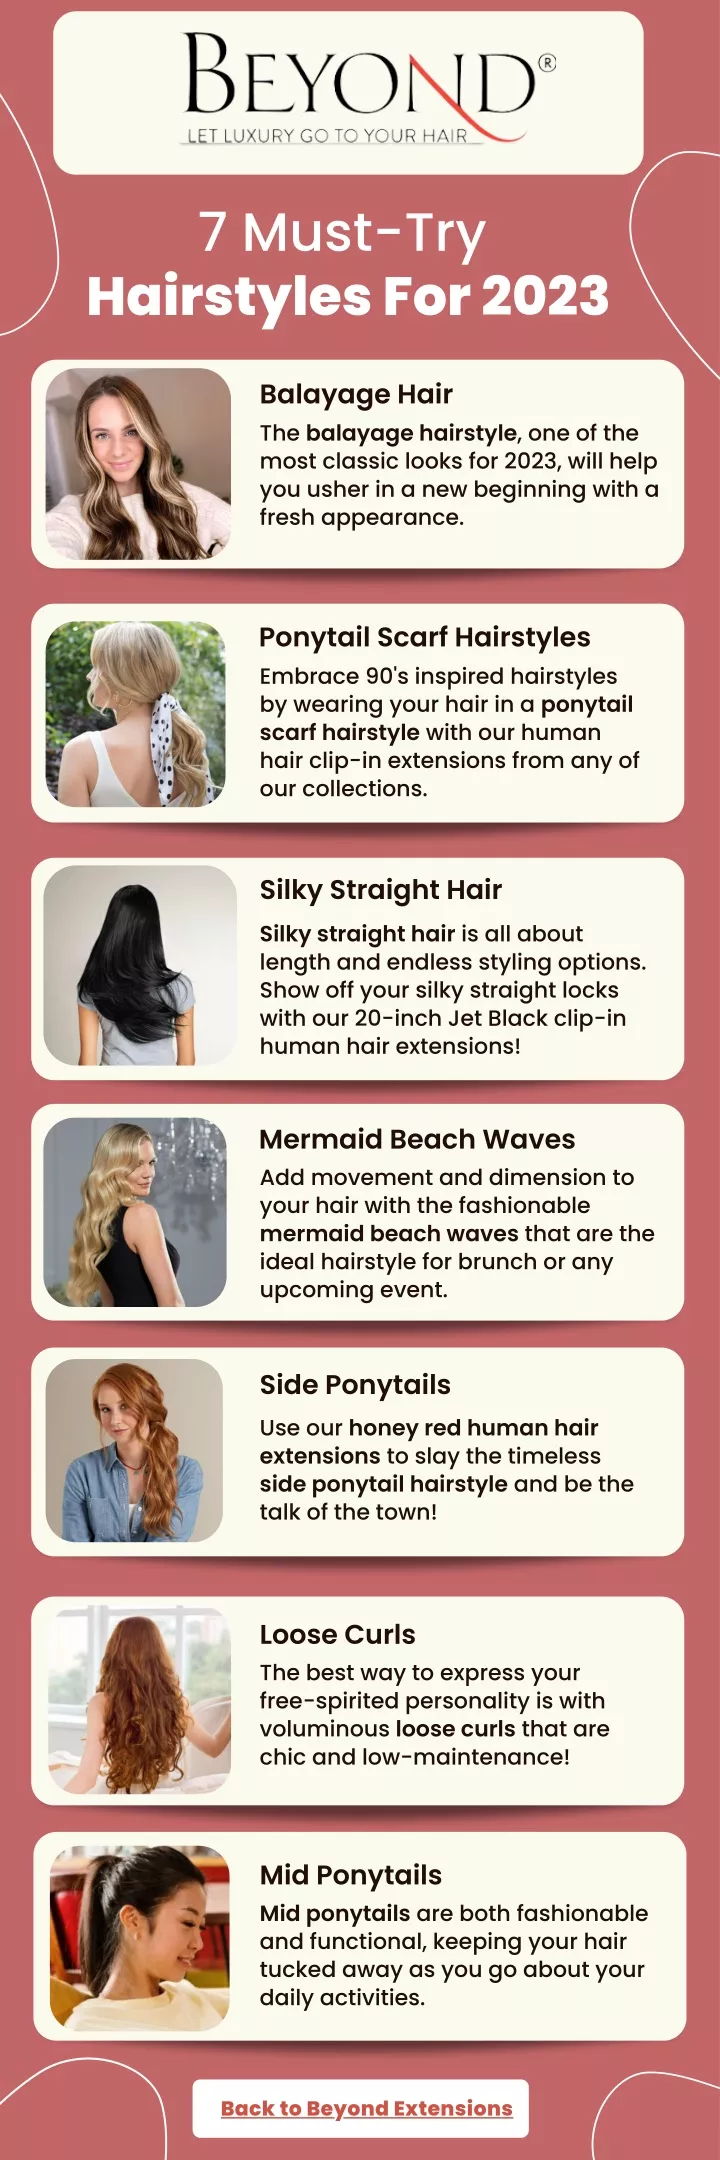 7 must try hairstyles for 2023